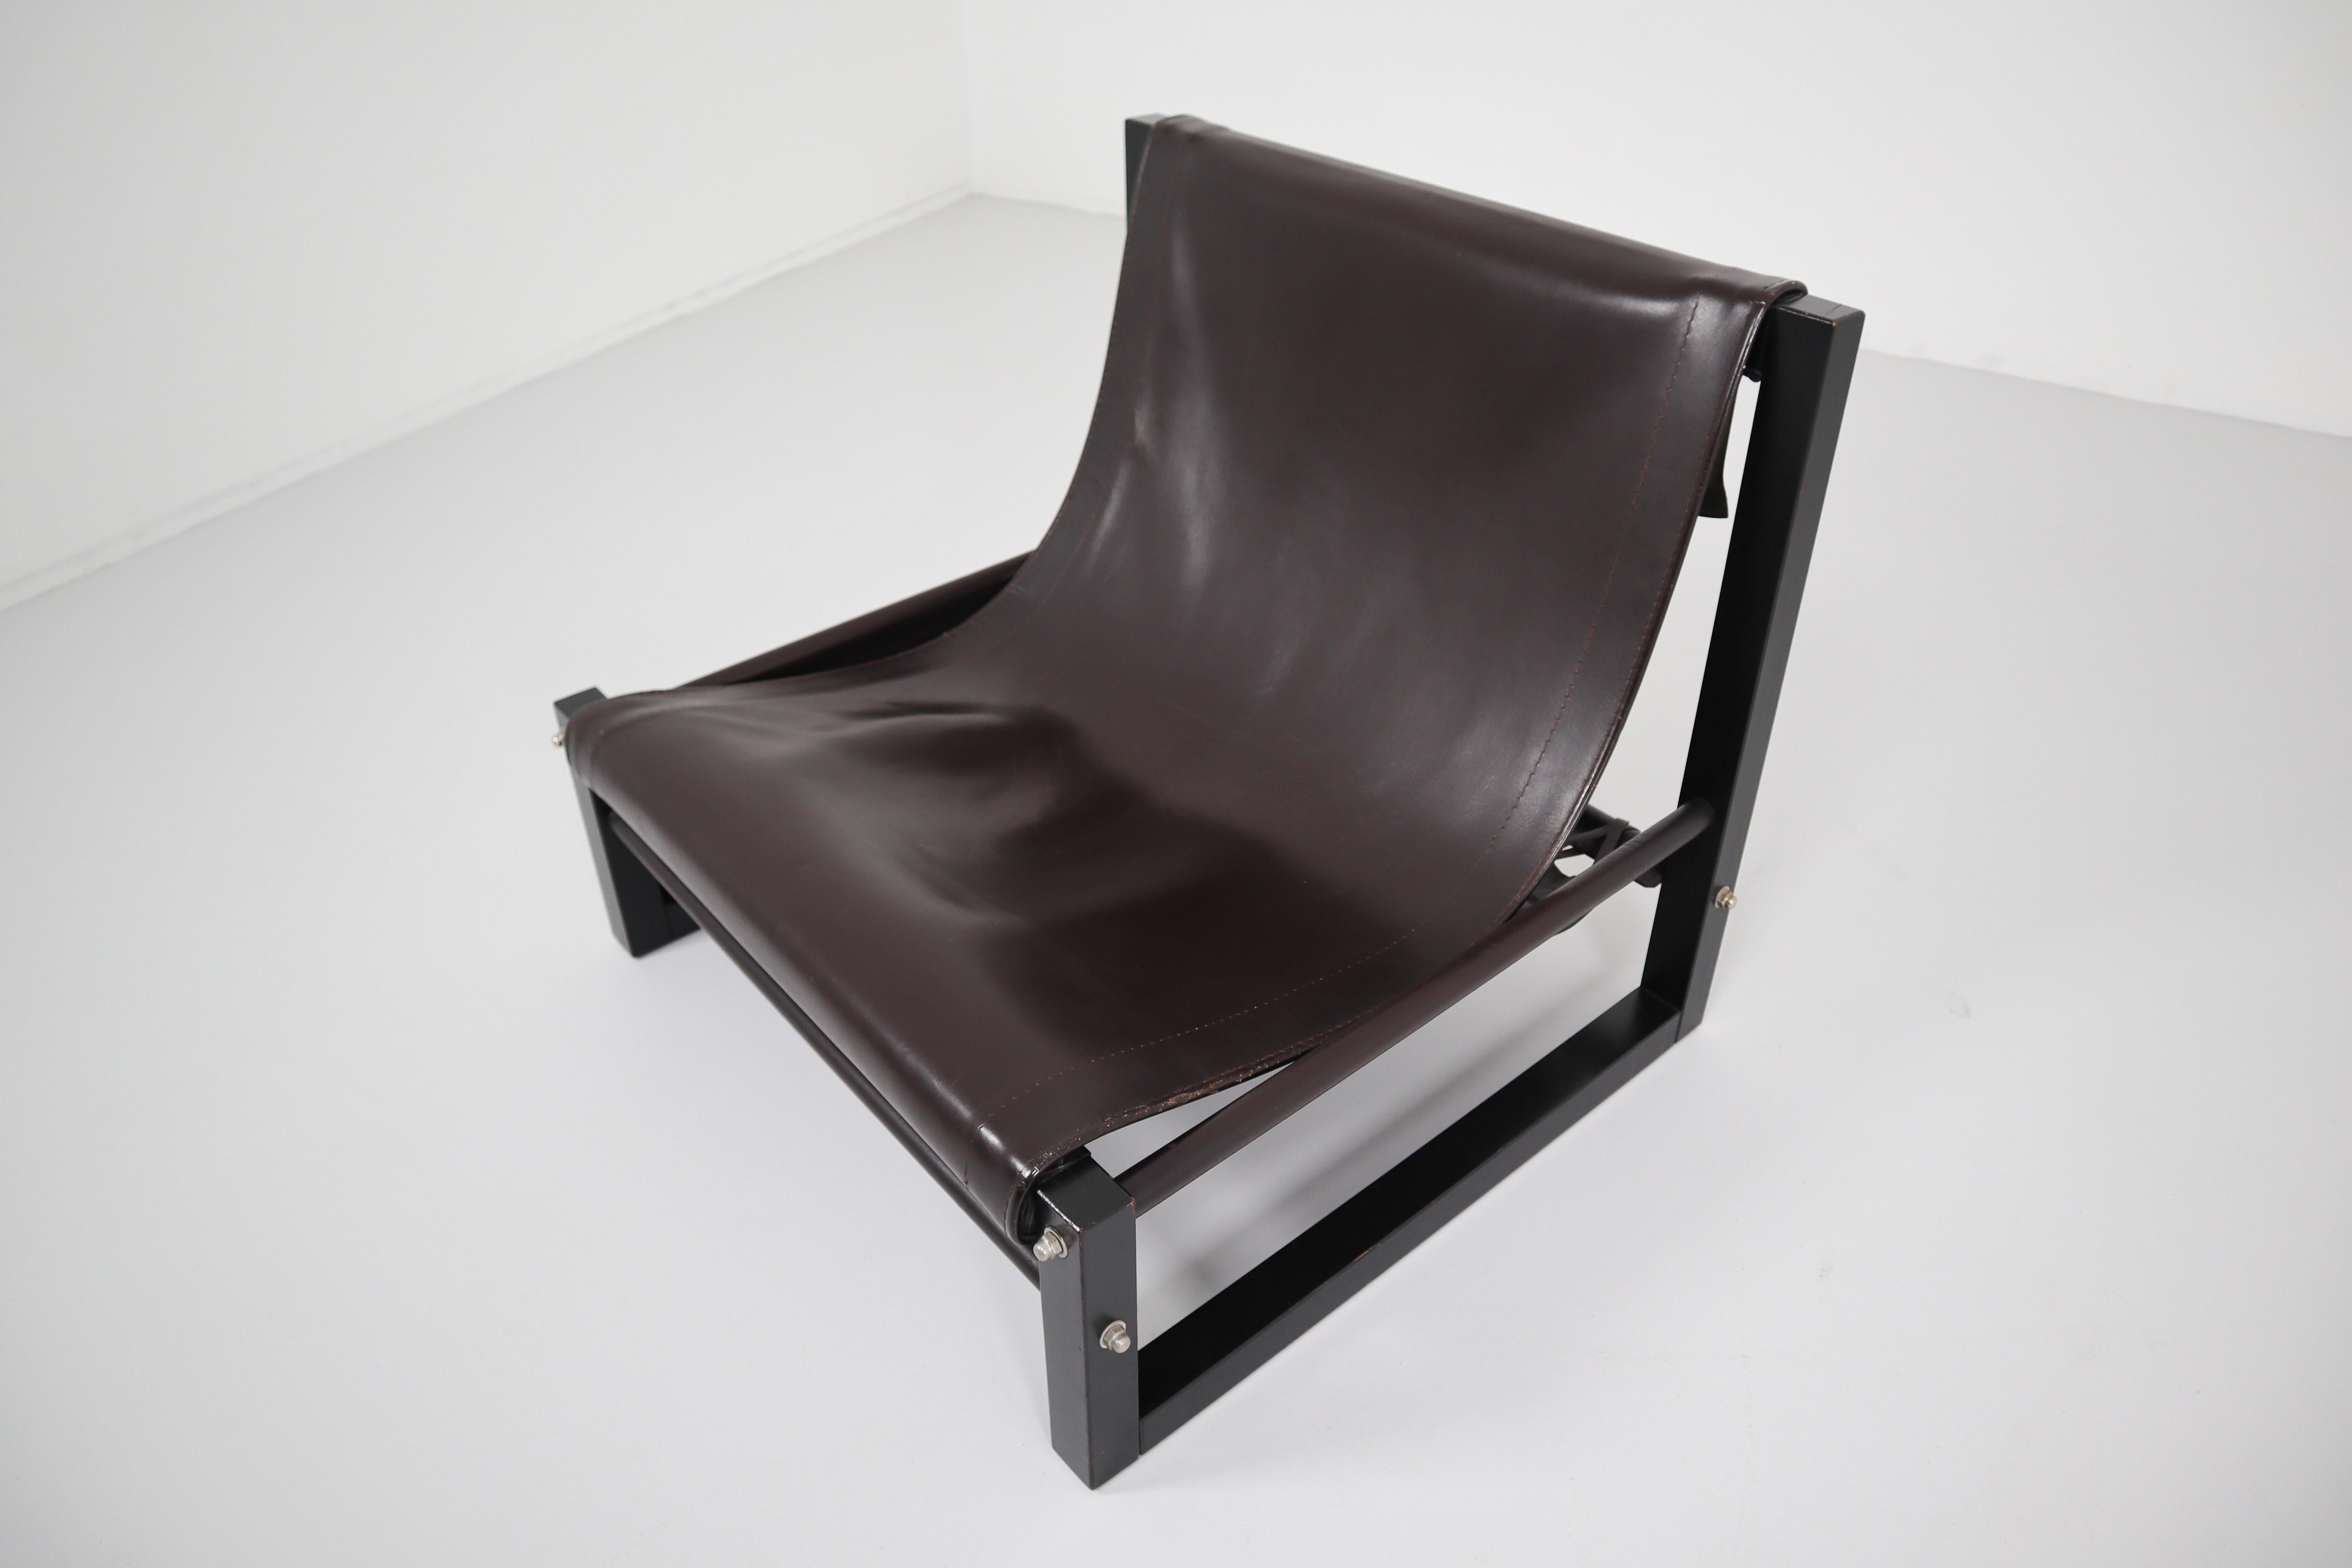 Leather Brutalist Chair Designed by Sonja Wasseur, the Netherlands, circa 1970